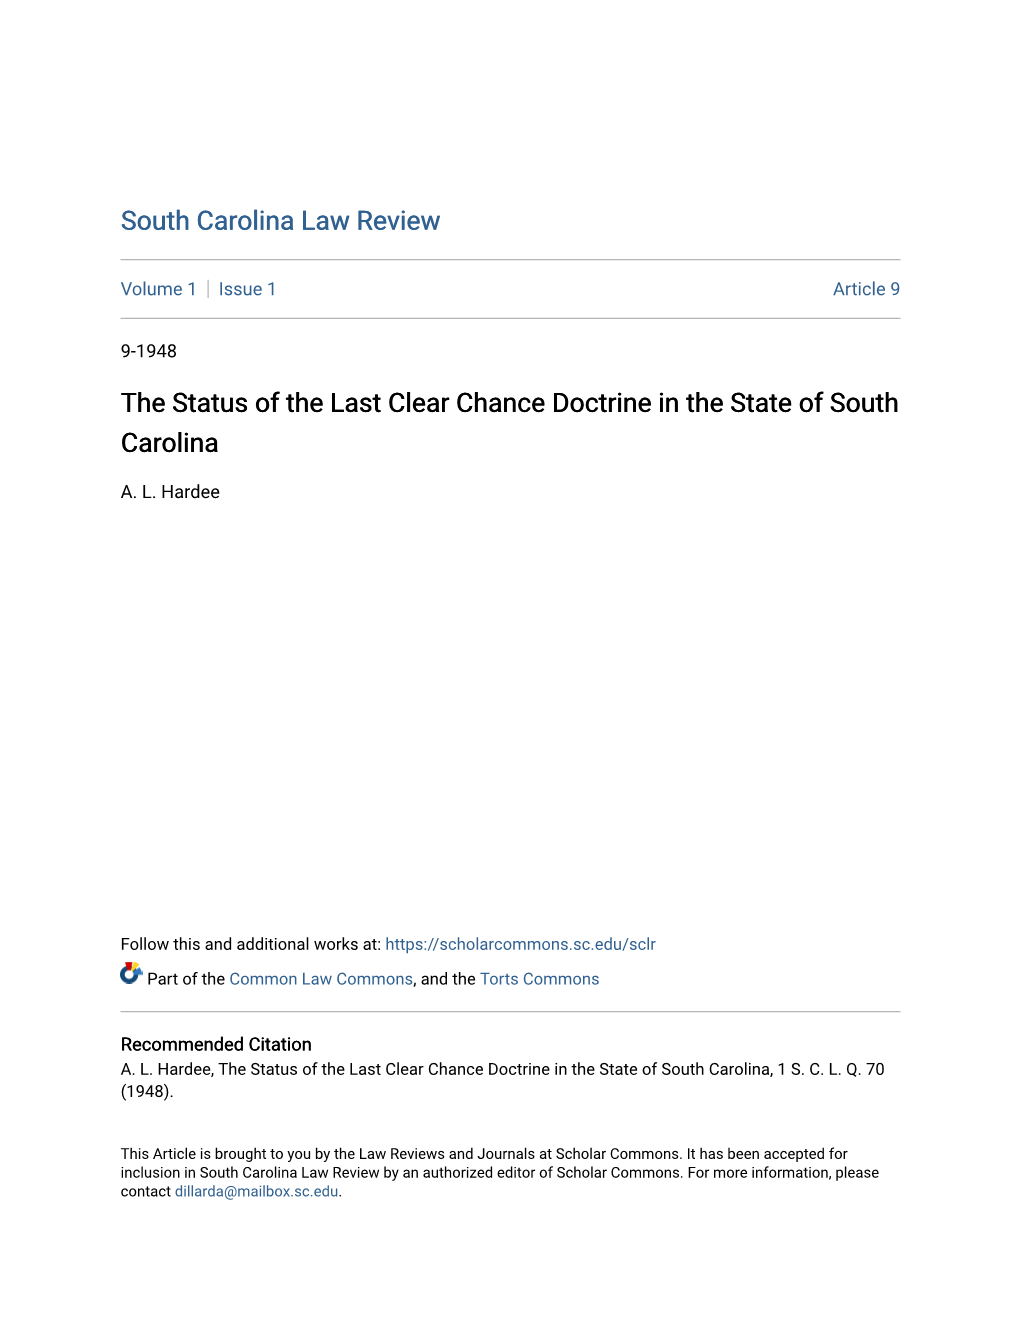 The Status of the Last Clear Chance Doctrine in the State of South Carolina